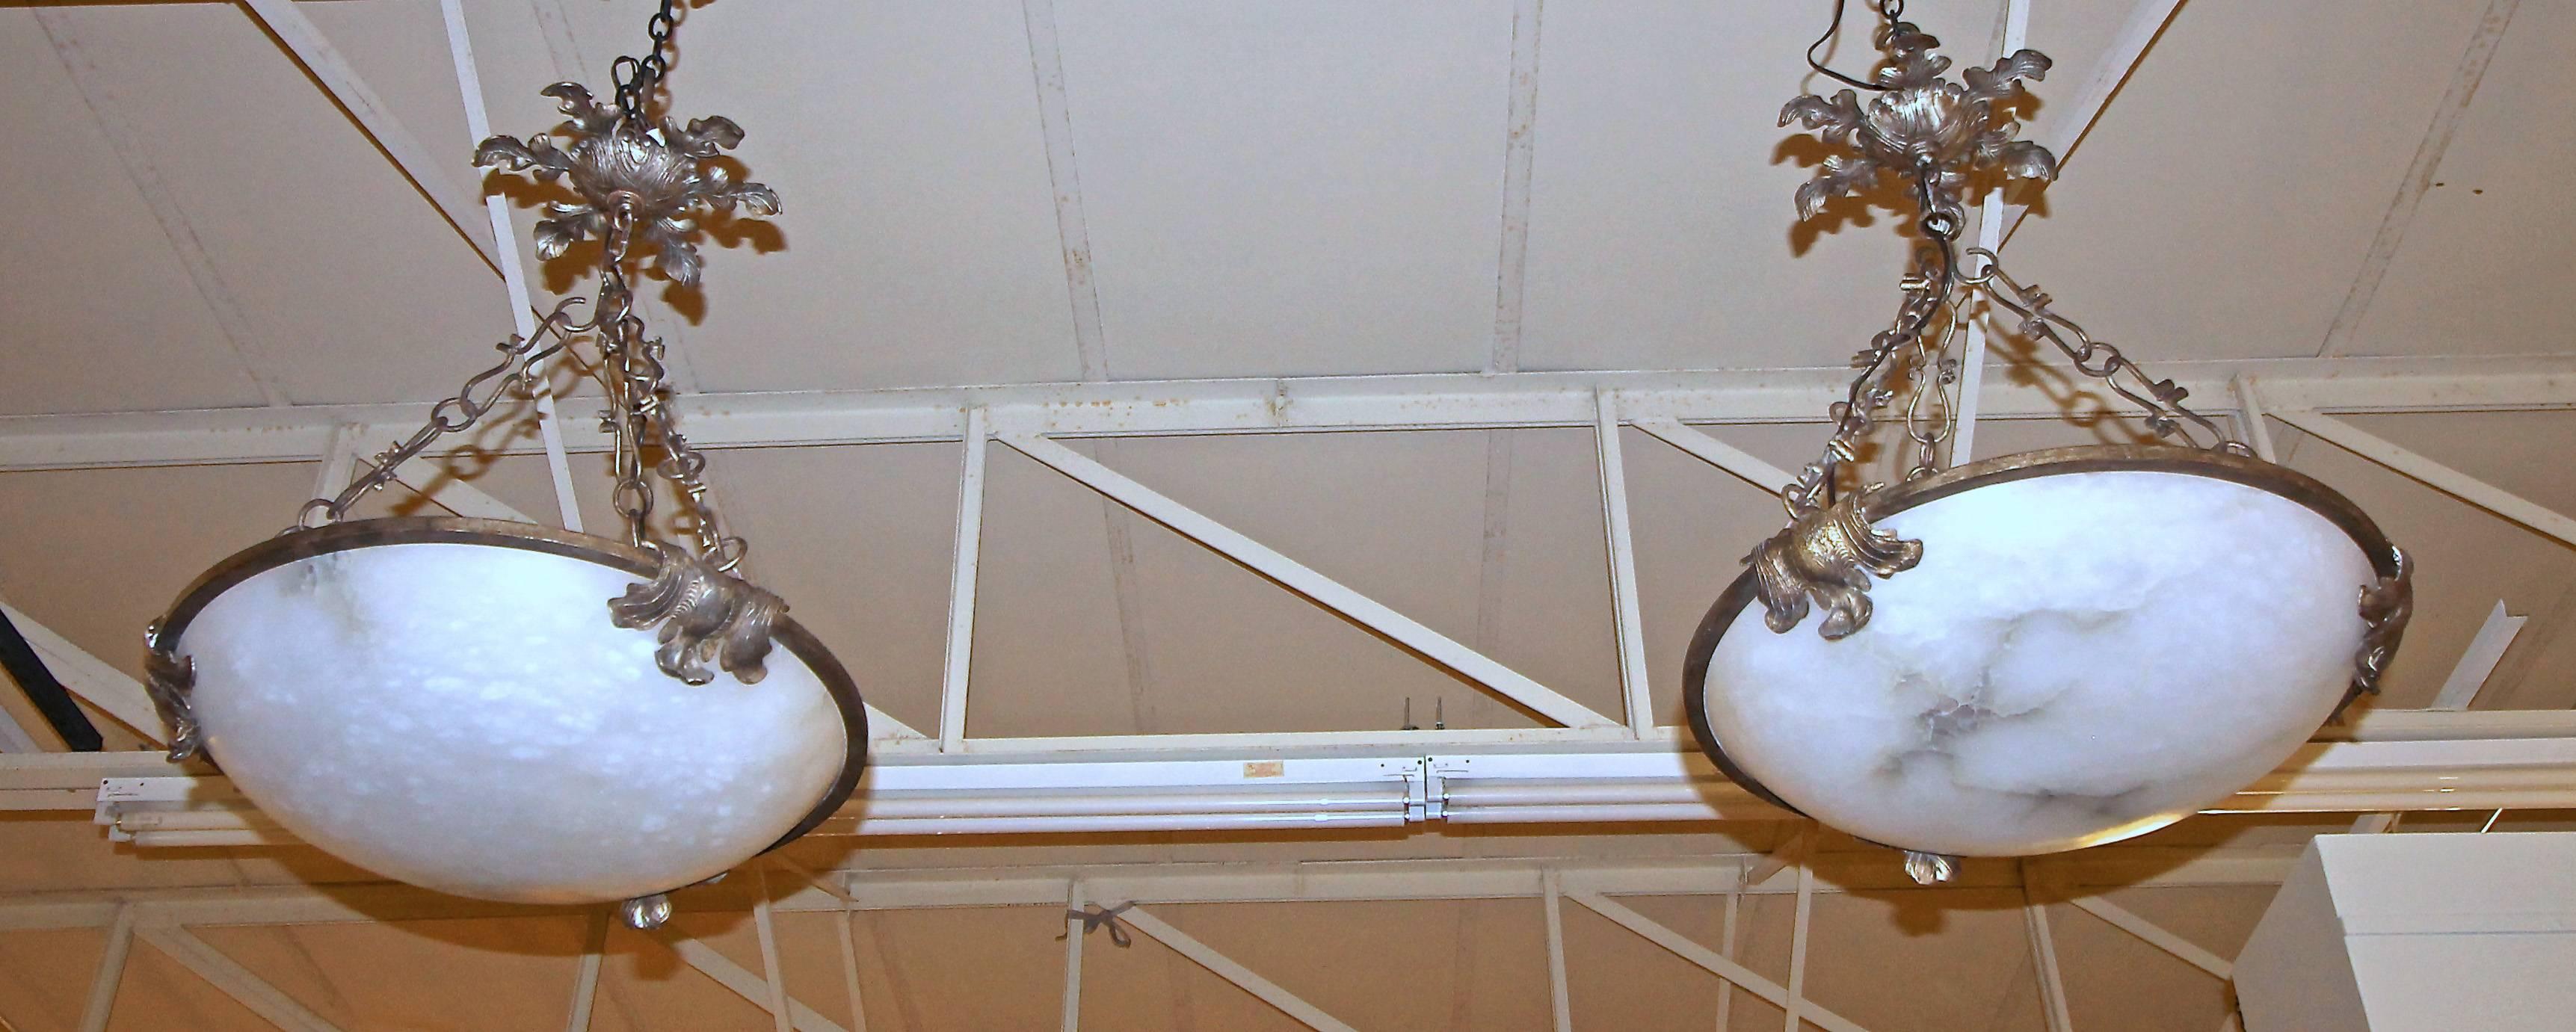 American Pair of Large Alabaster and Wrought Iron Pendant Lights